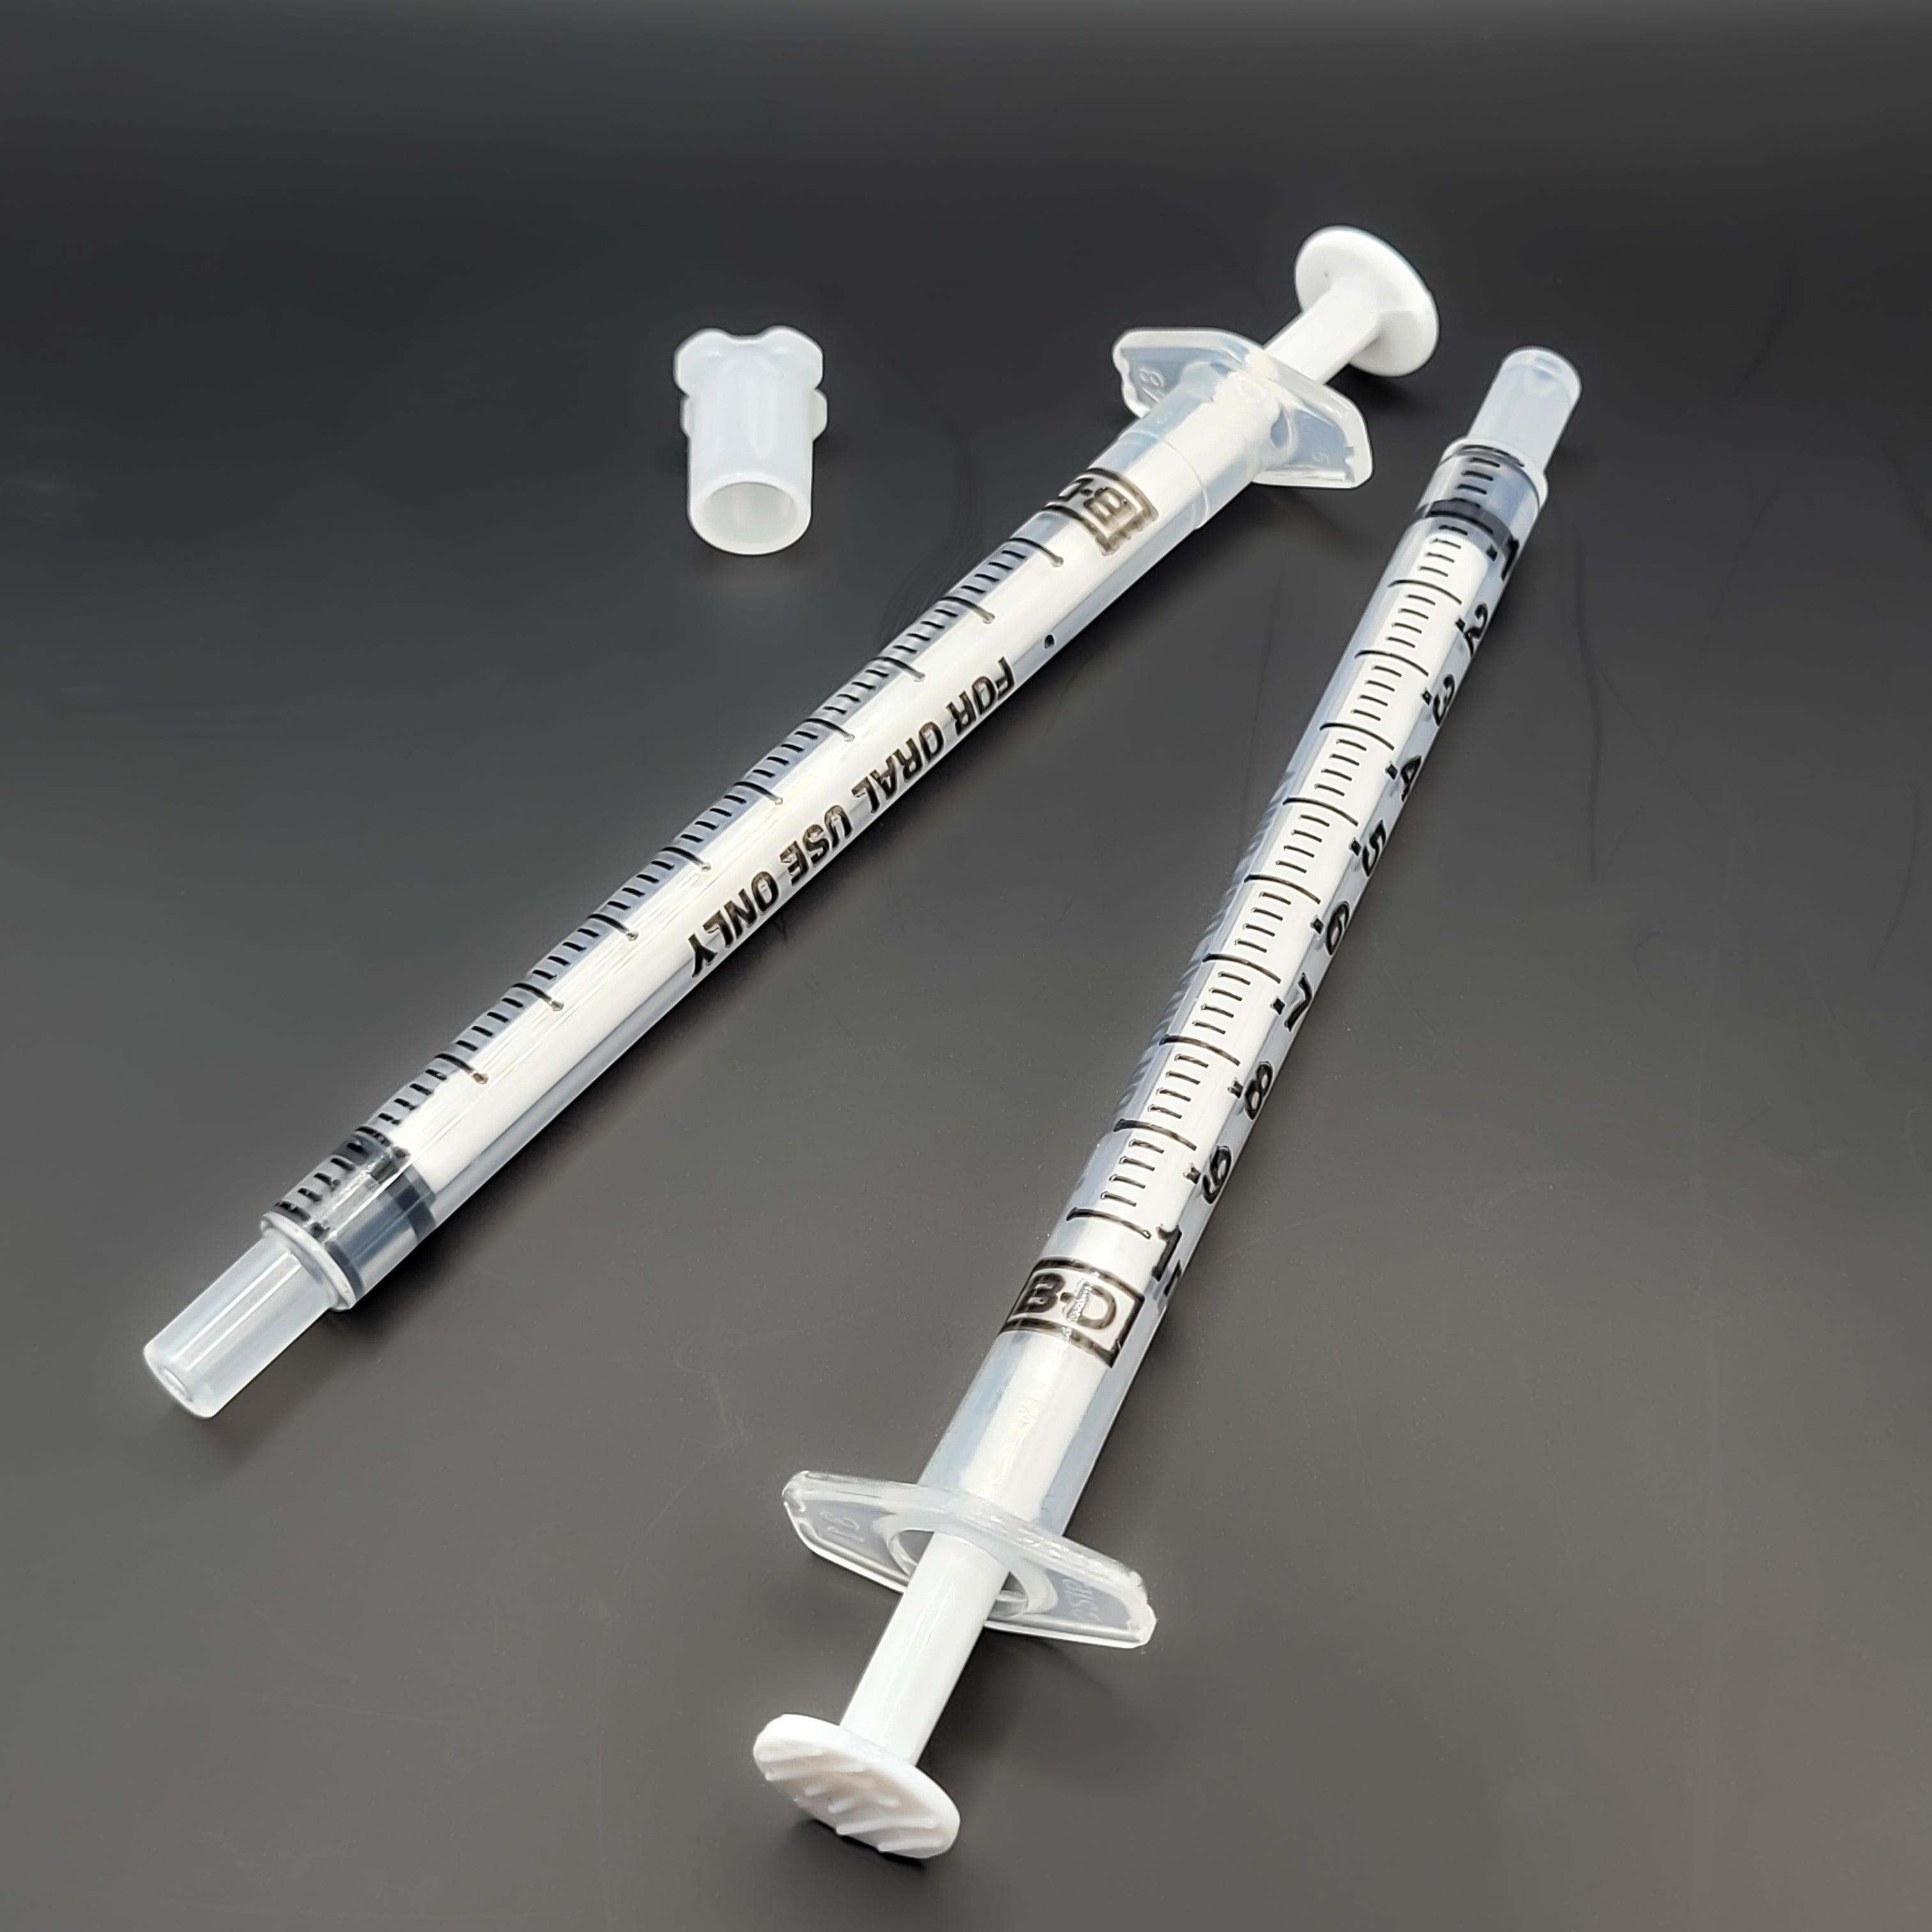 BD Clear Oral Syringes with tips (1ml)